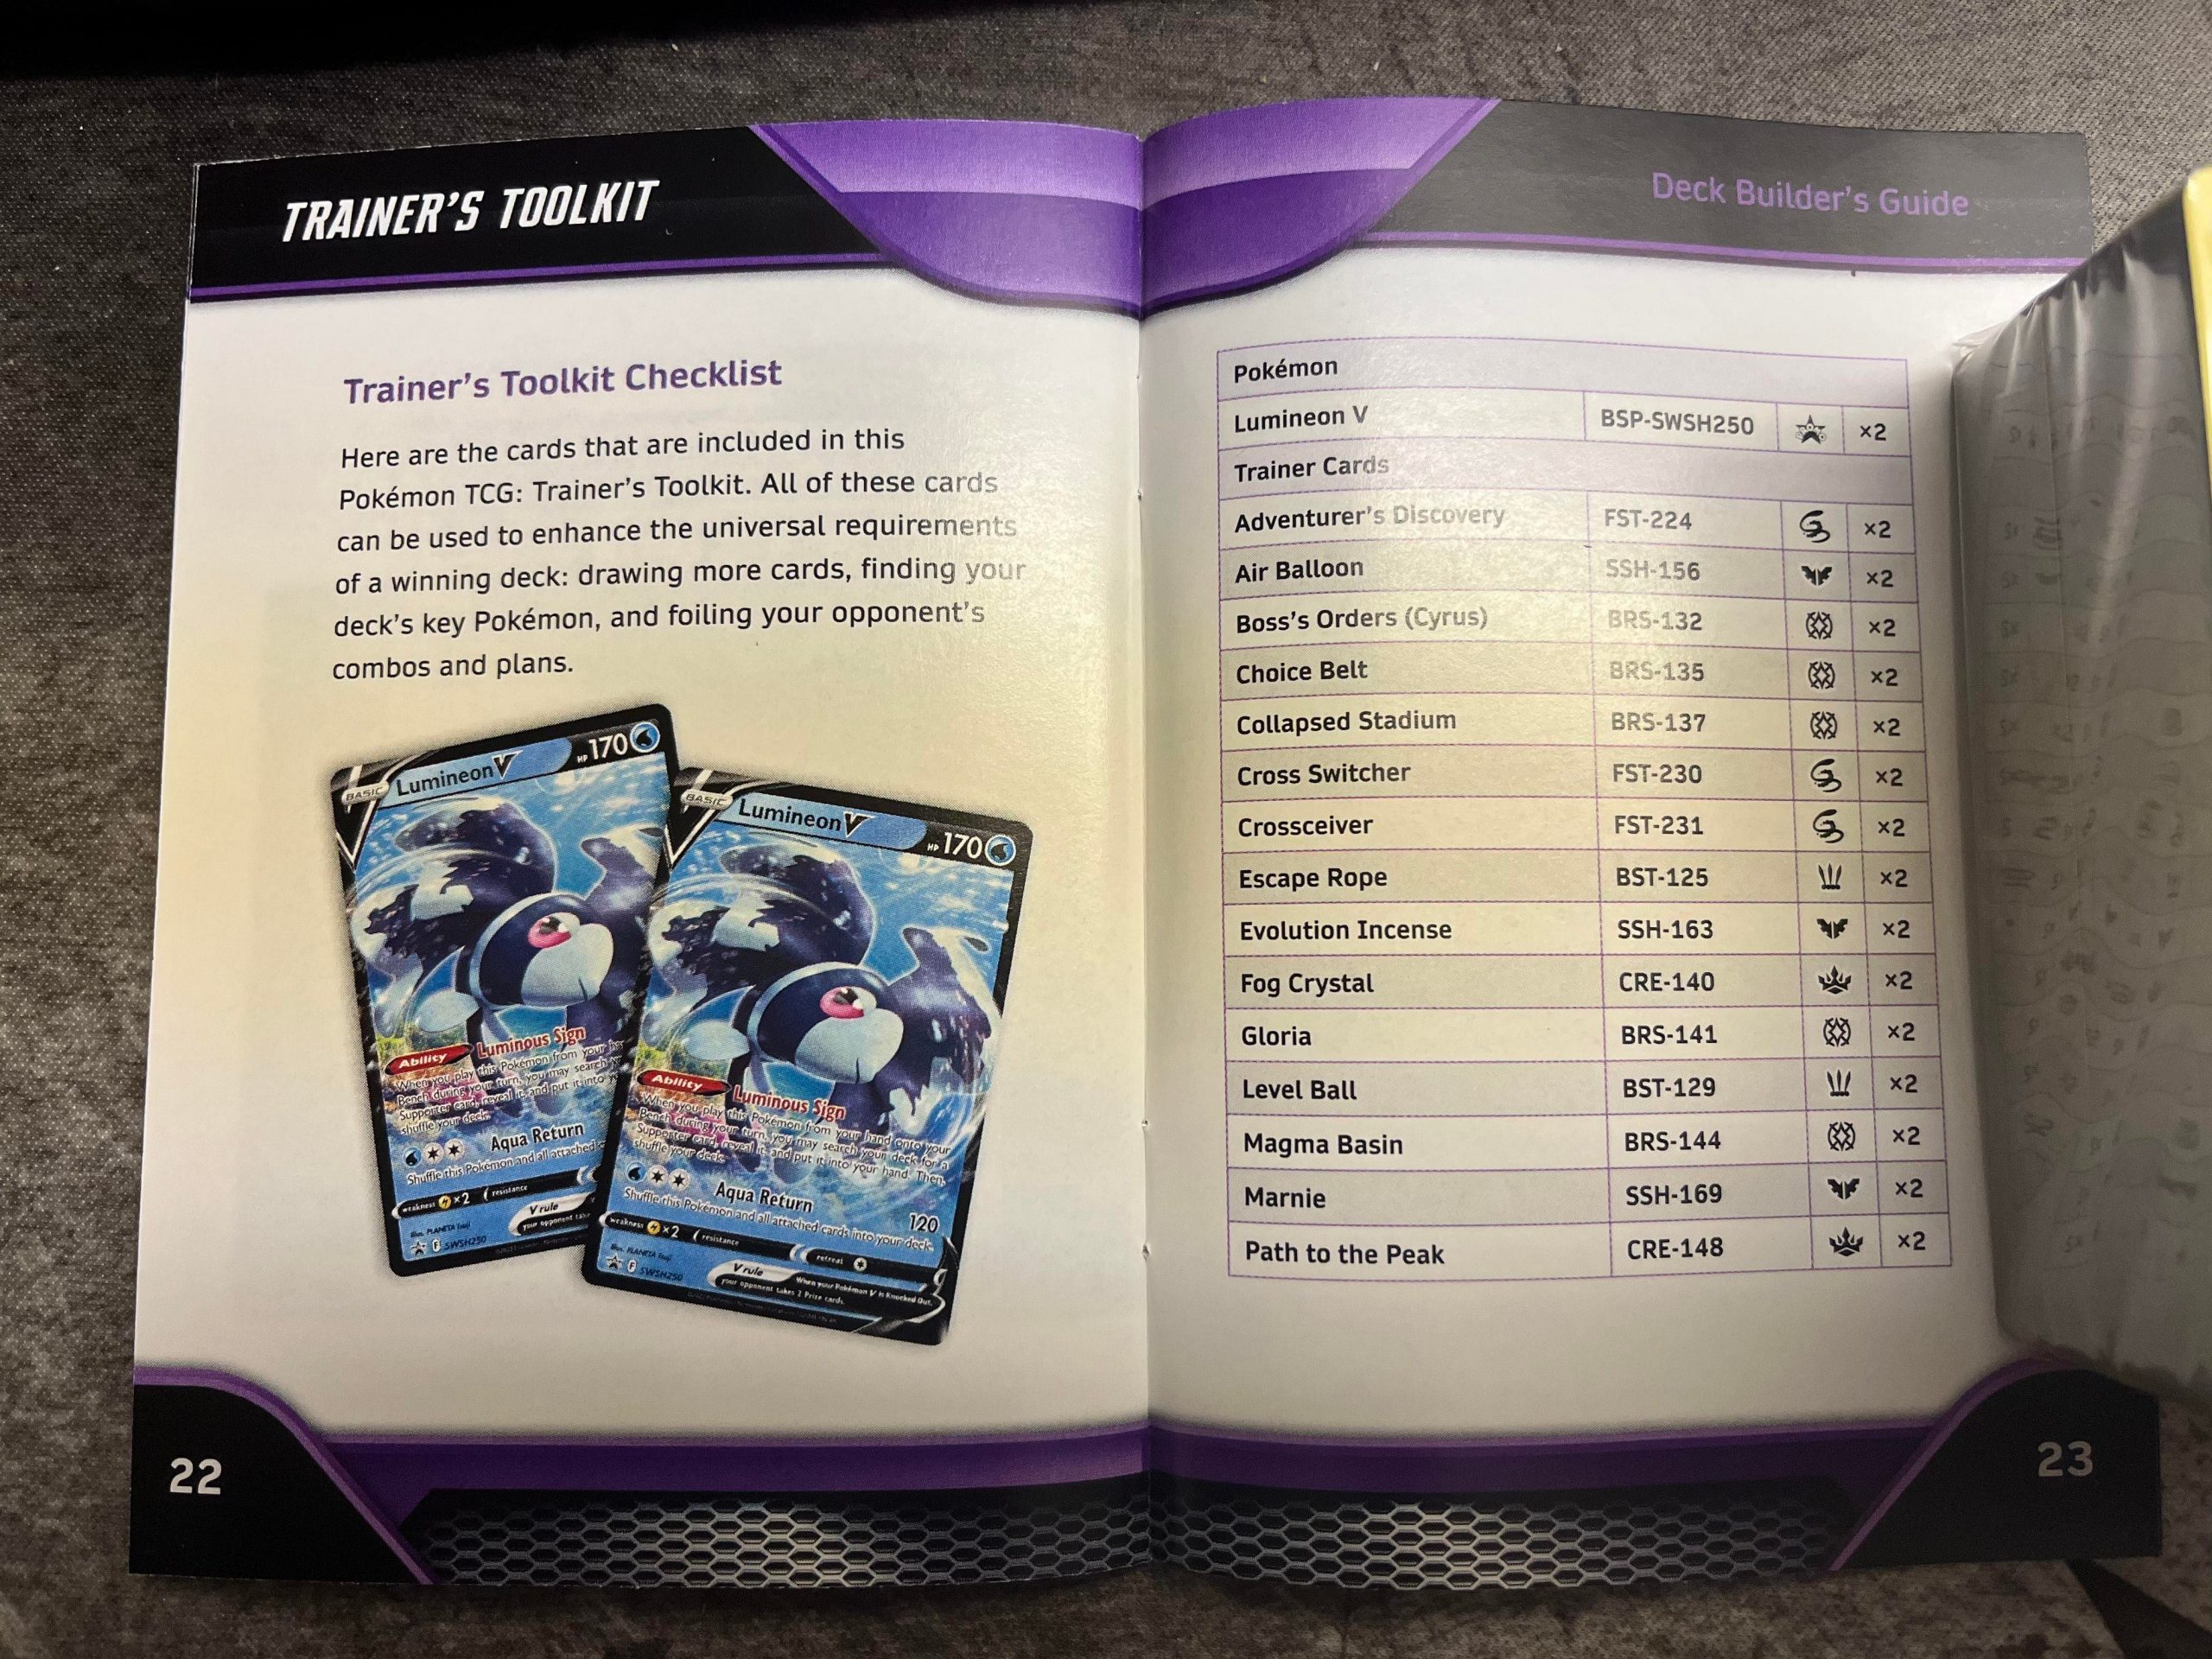 Card List and Contents of Trainer's Toolkit 2022 Revealed